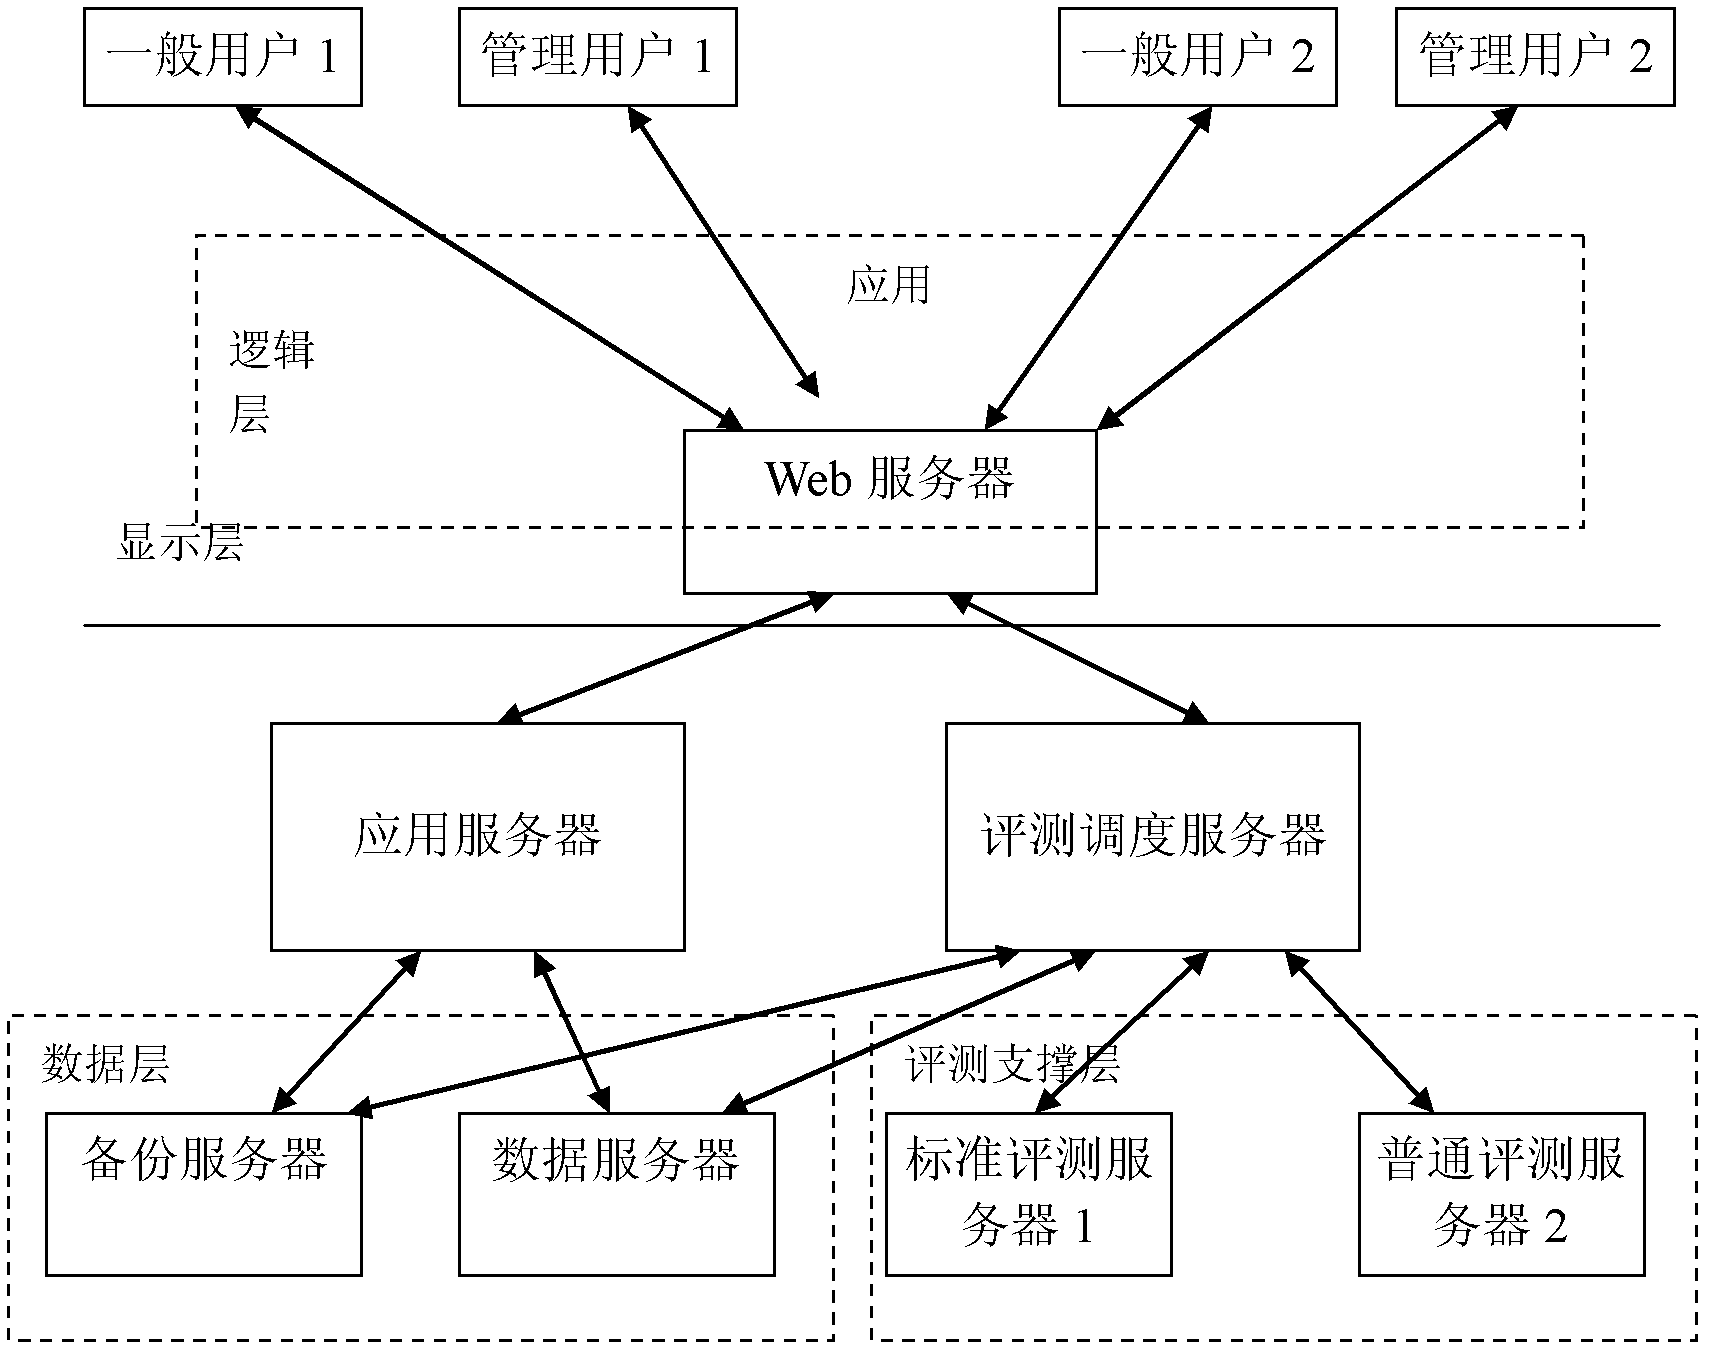 Evaluation system of extendable program competition based on service